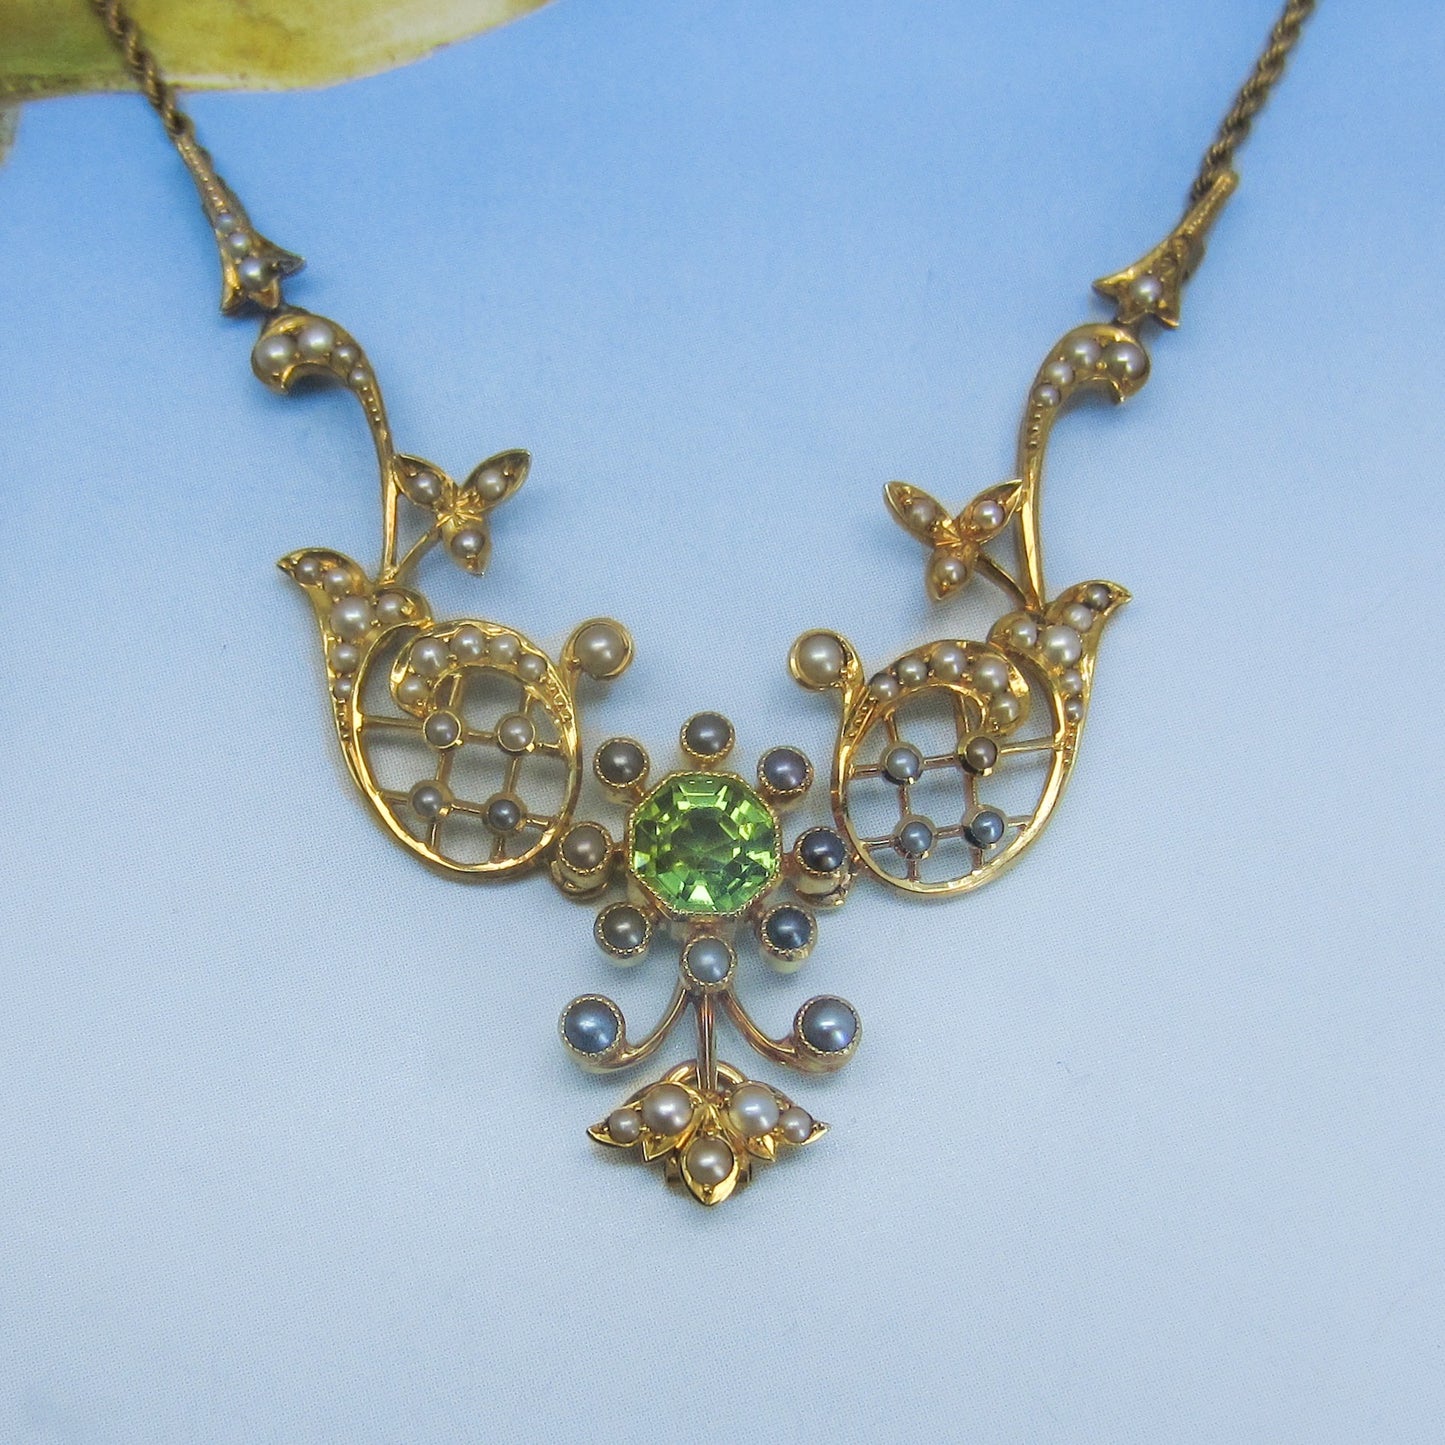 SOLD--Edwardian Peridot and Pearl Necklace 15k, British c. 1900